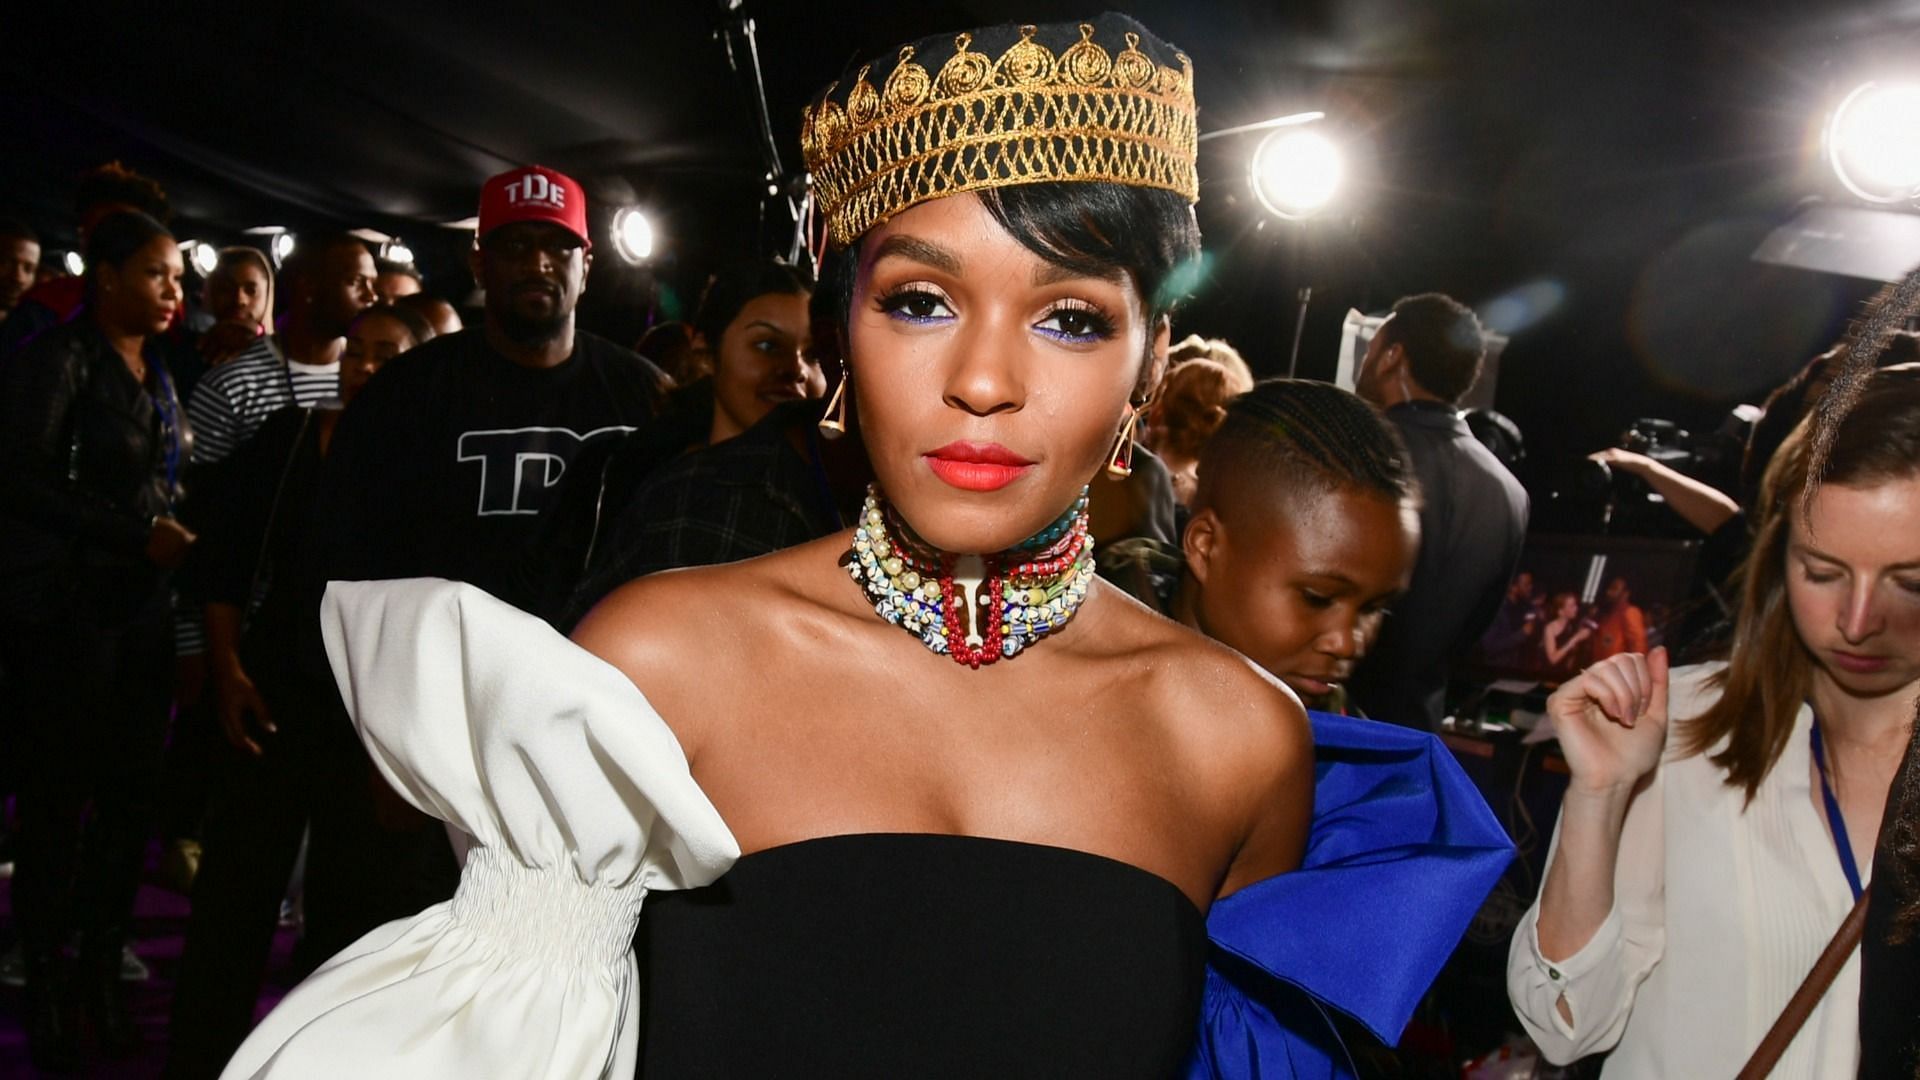 Janelle Monae previously revealed that she is still exploring her identity. (Image via Getty Images/Emma McIntyre)